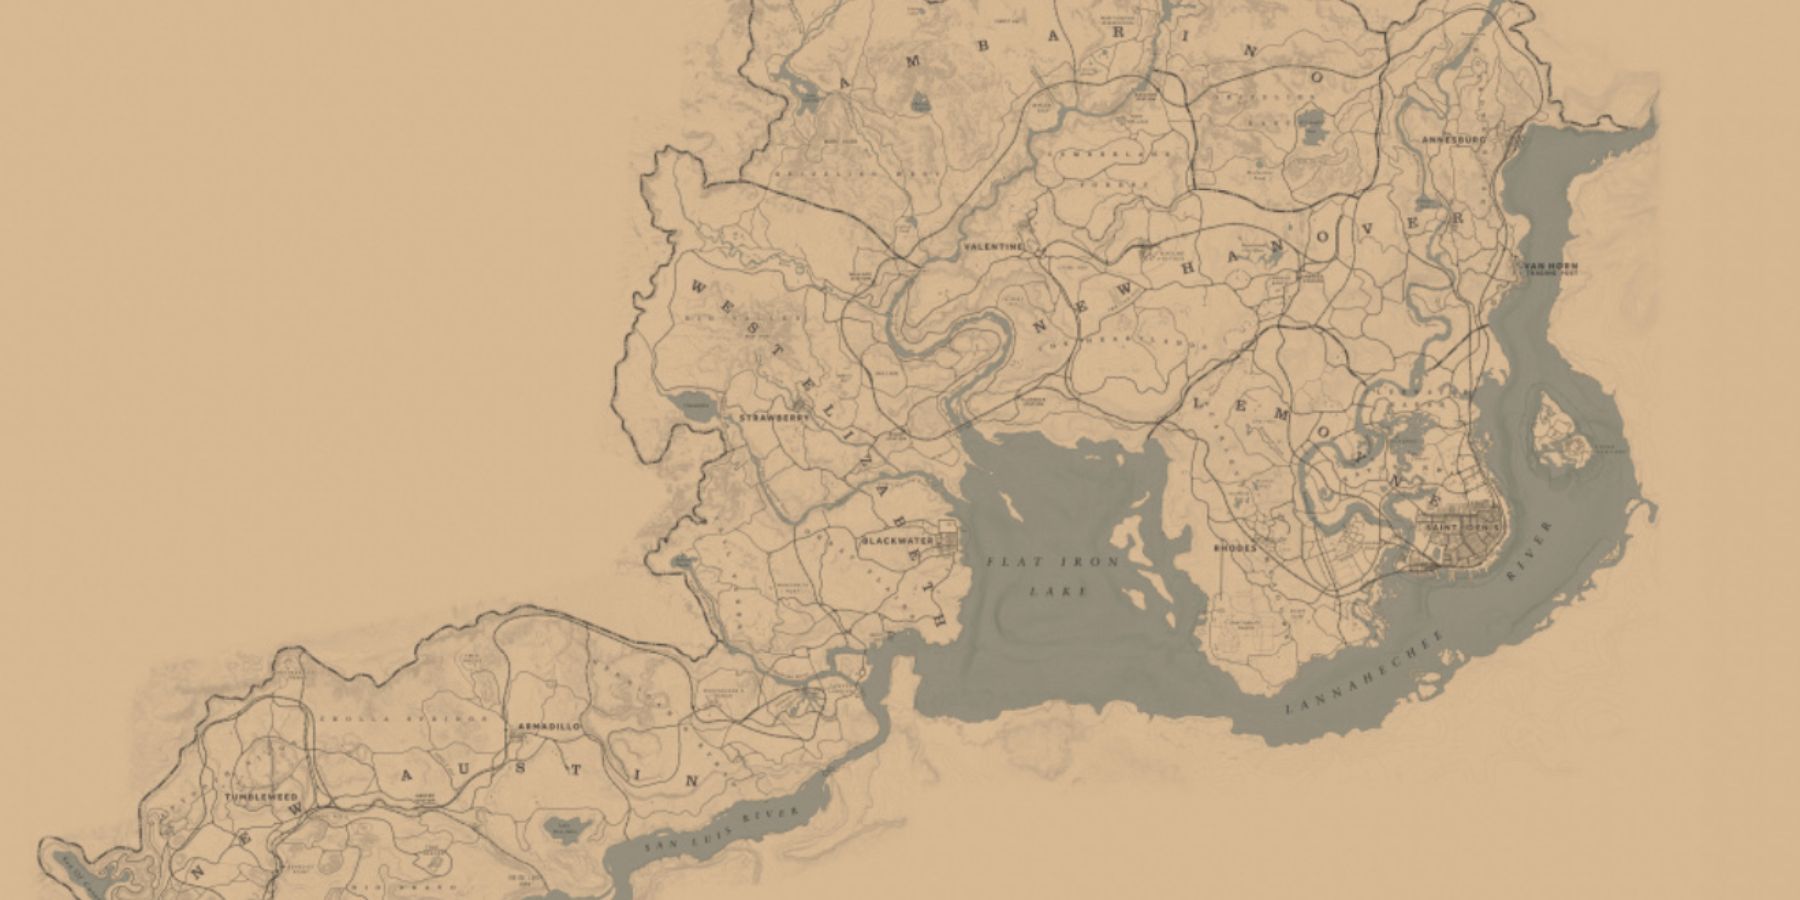 Red Dead Redemption 2: How to Unlock the Whole Map